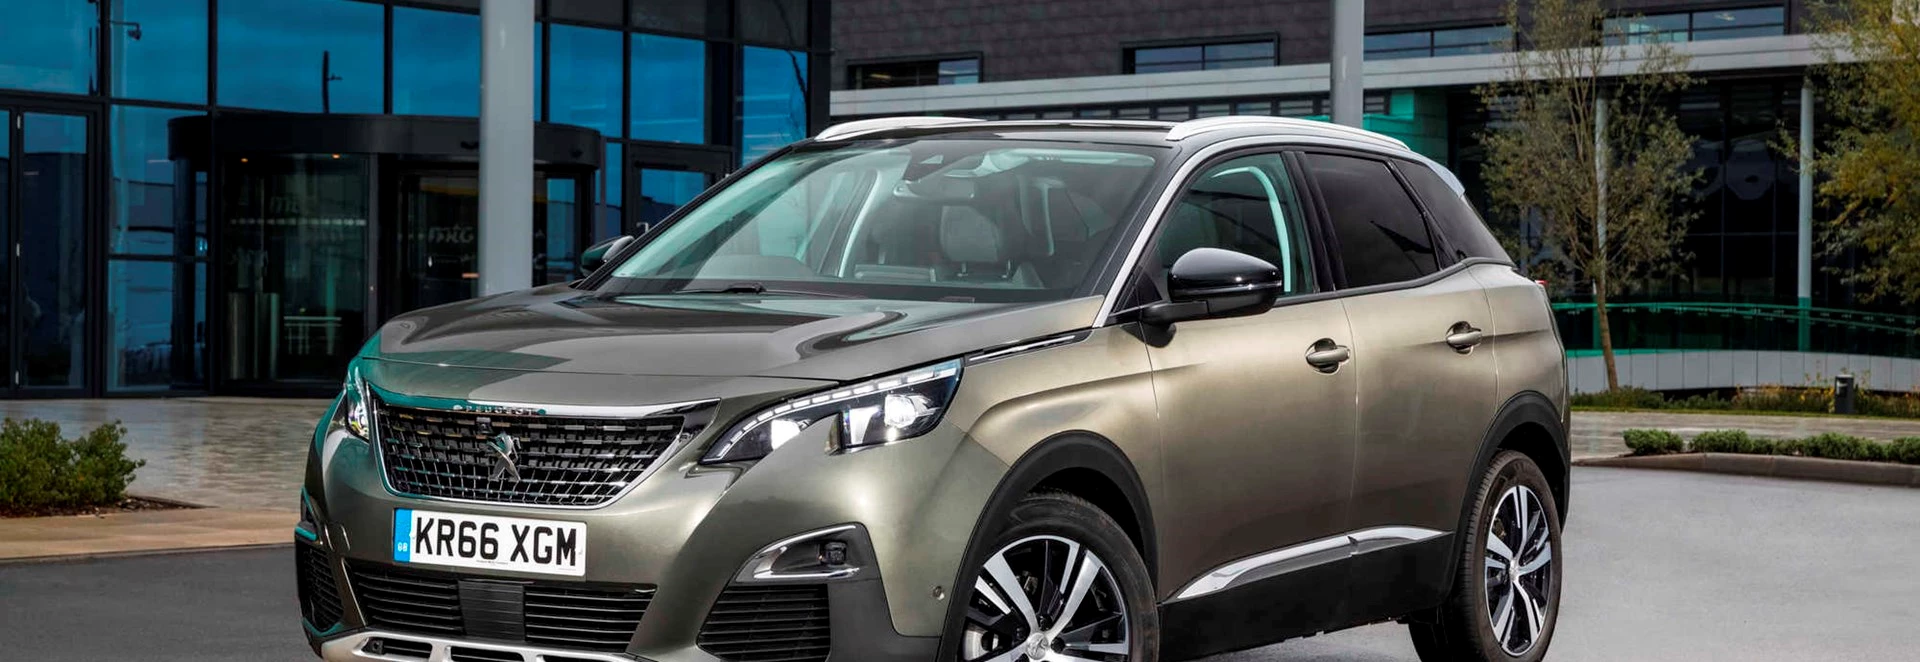 Peugeot 3008 Allure 1.6 THP 165 SUV review 